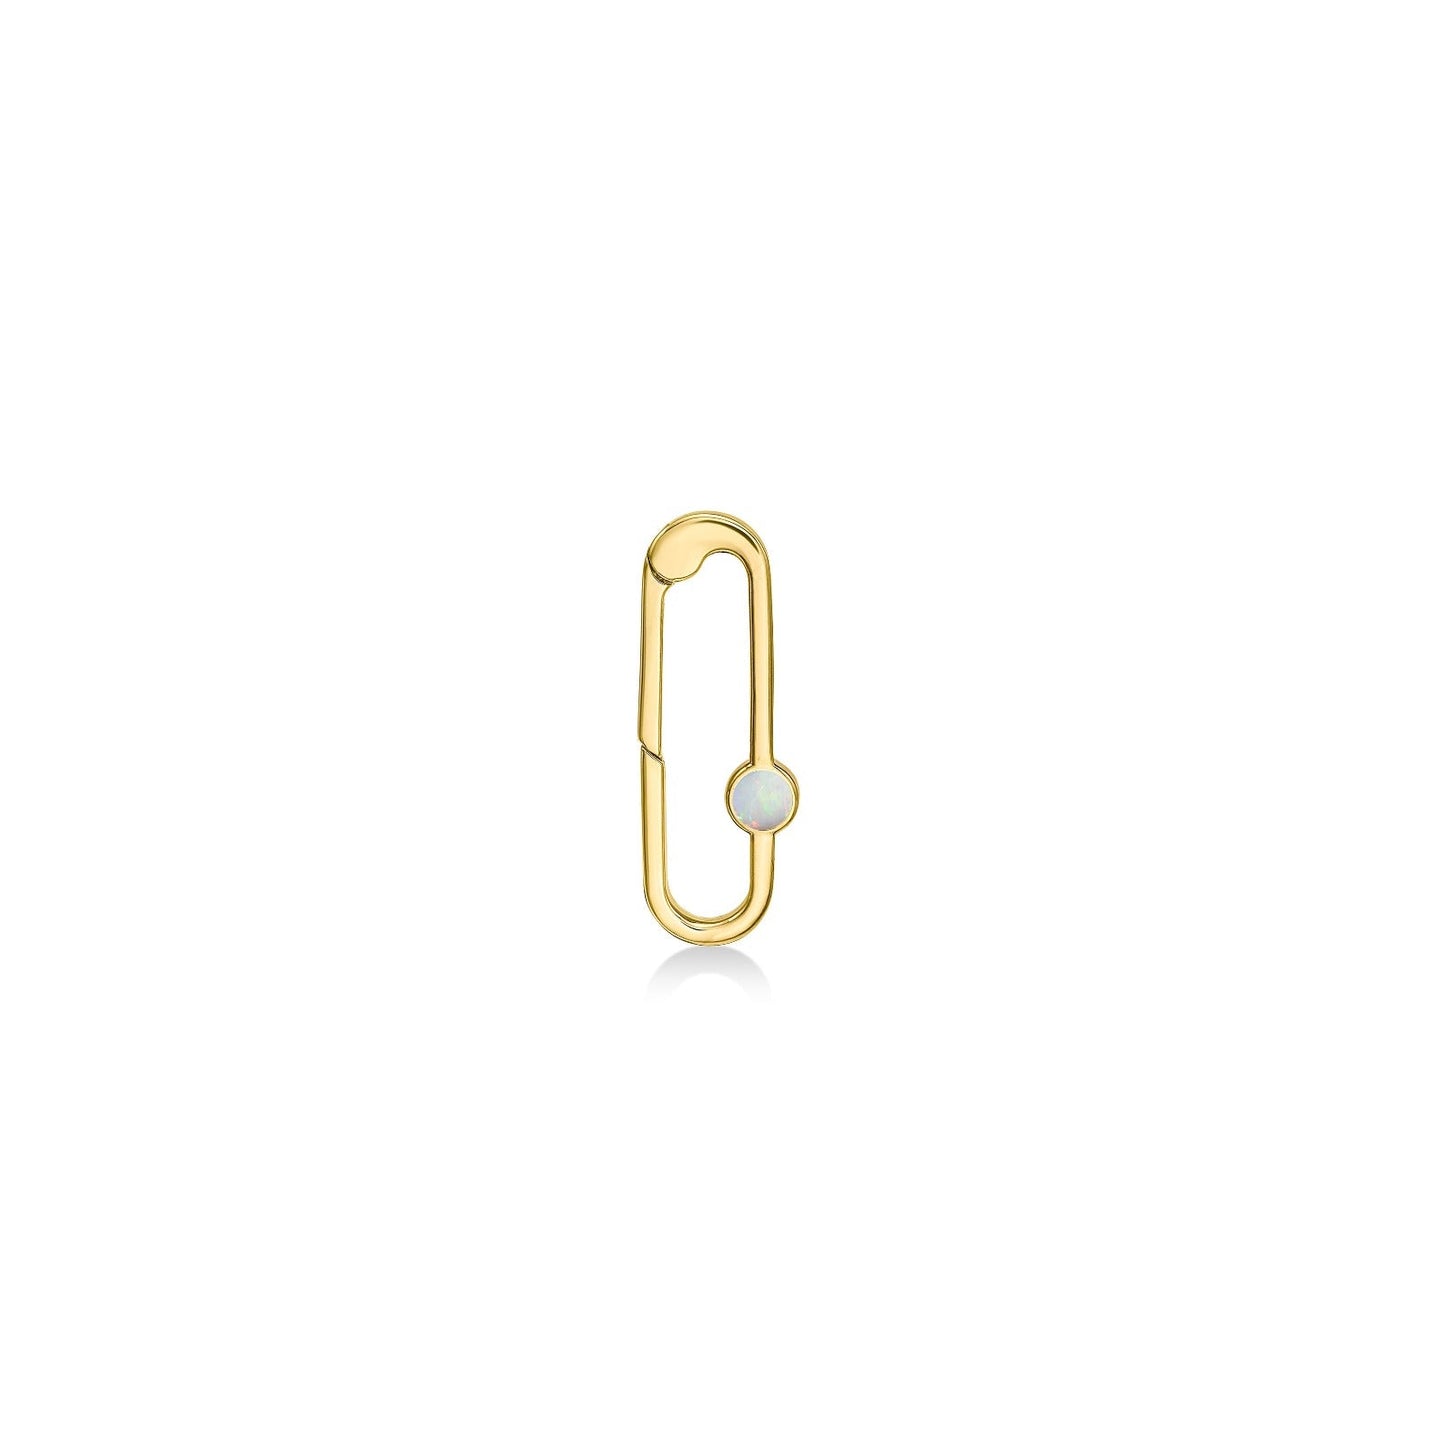 Paperclip charm lock with opal